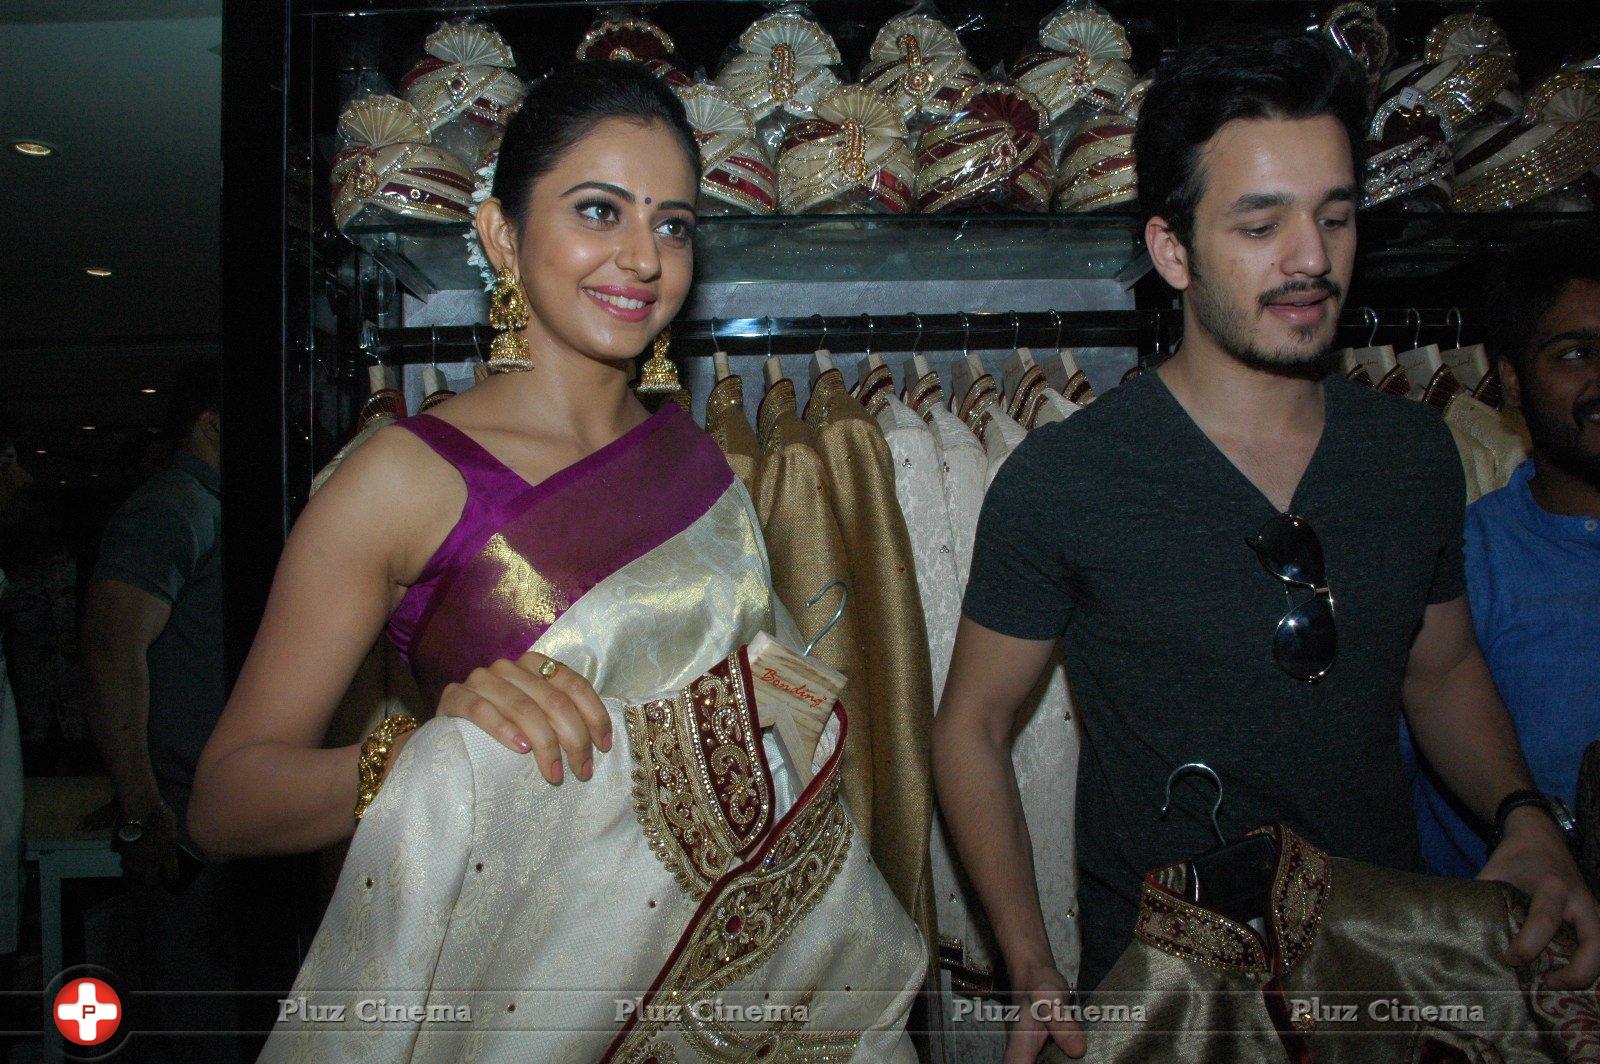 Akhil and Rakul Preet Singh Launches South India Shopping Mall Stills | Picture 1197380